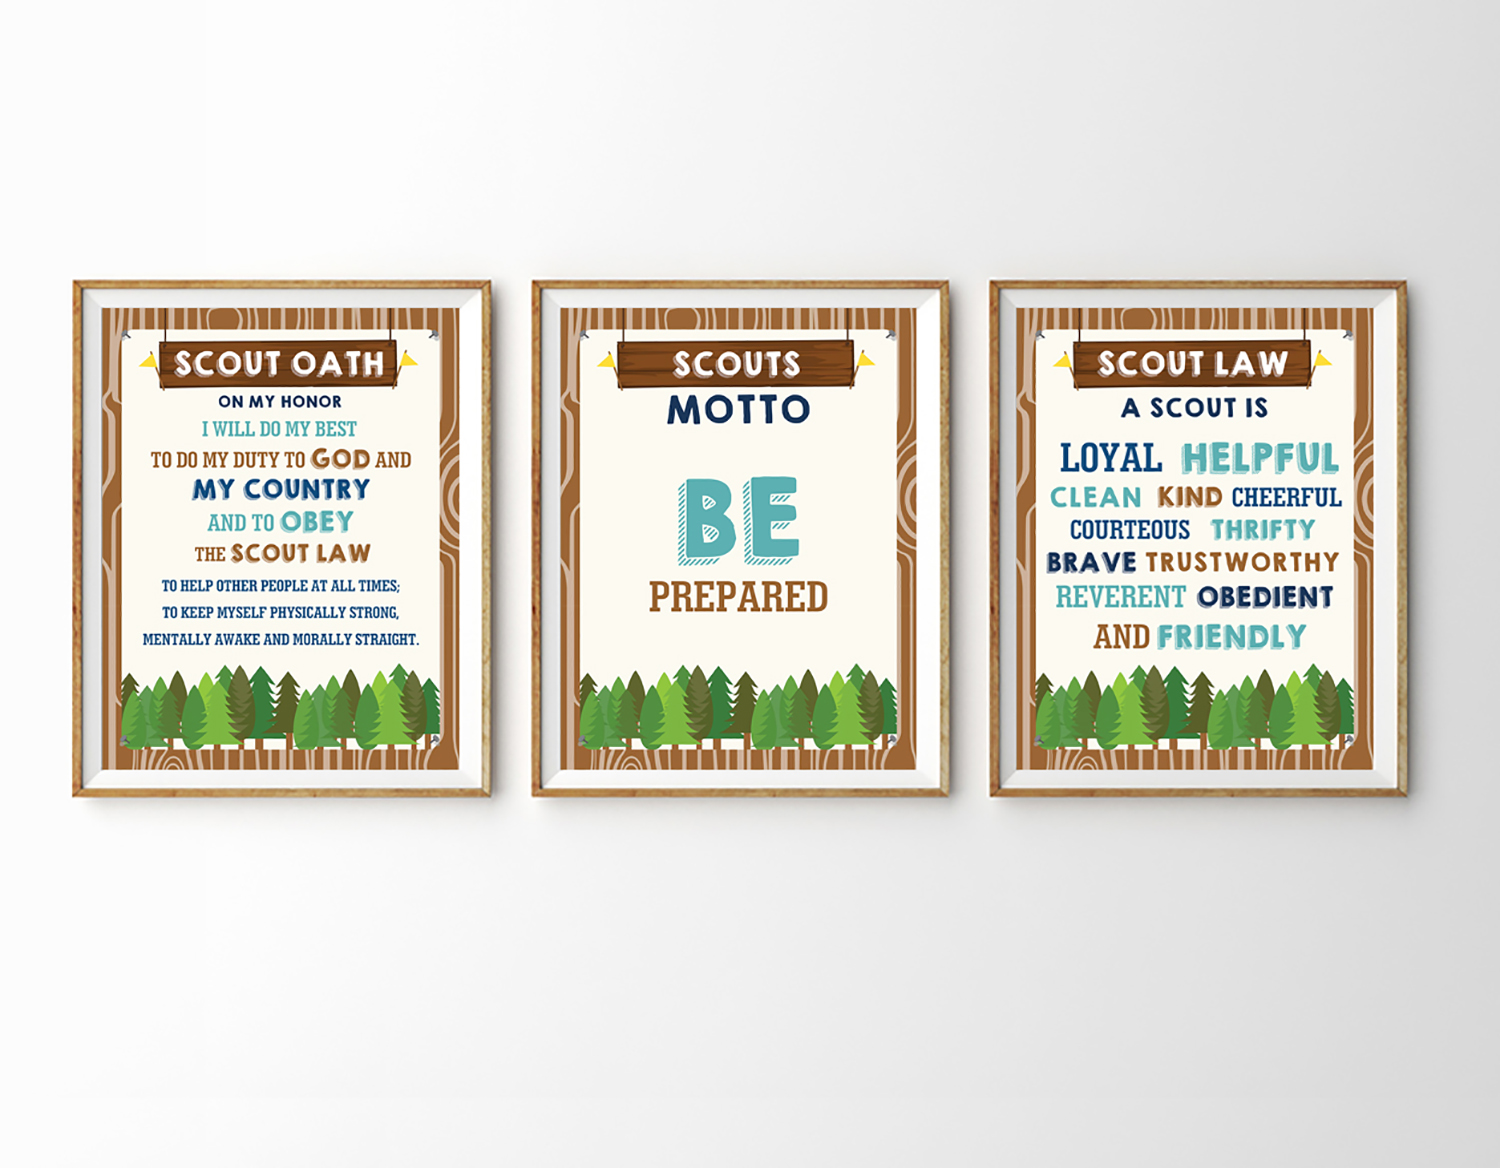 boy-scout-and-girl-scout-motto-oath-law-posters-printables